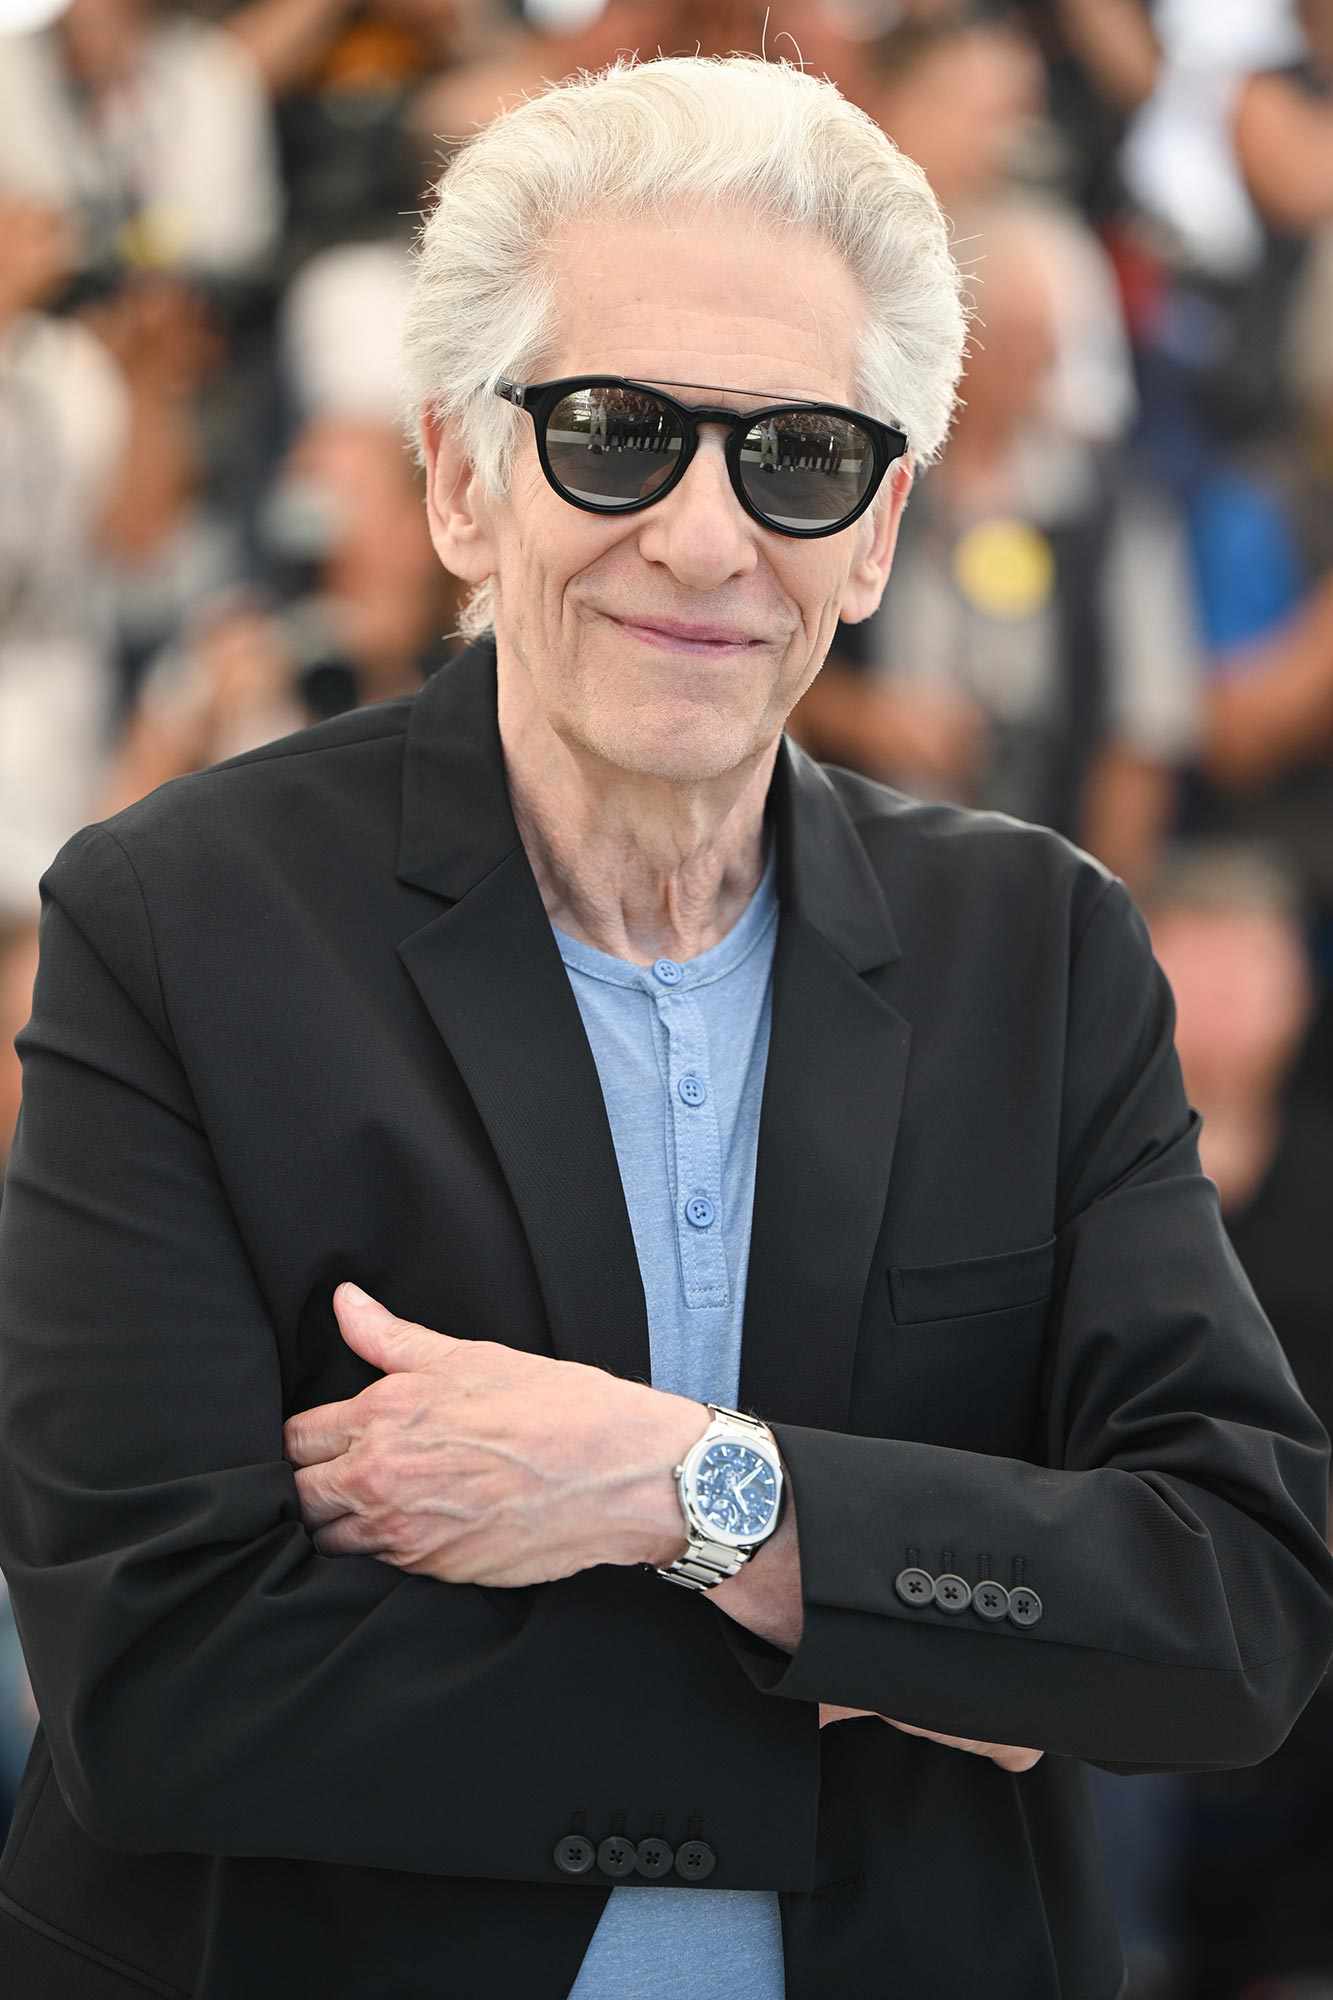 Cannes Film Festival 2022 Director David Cronenberg attends the photocall for "Crimes Of The Future" during the 75th annual Cannes film festival at Palais des Festivals on May 24, 2022 in Cannes, France.